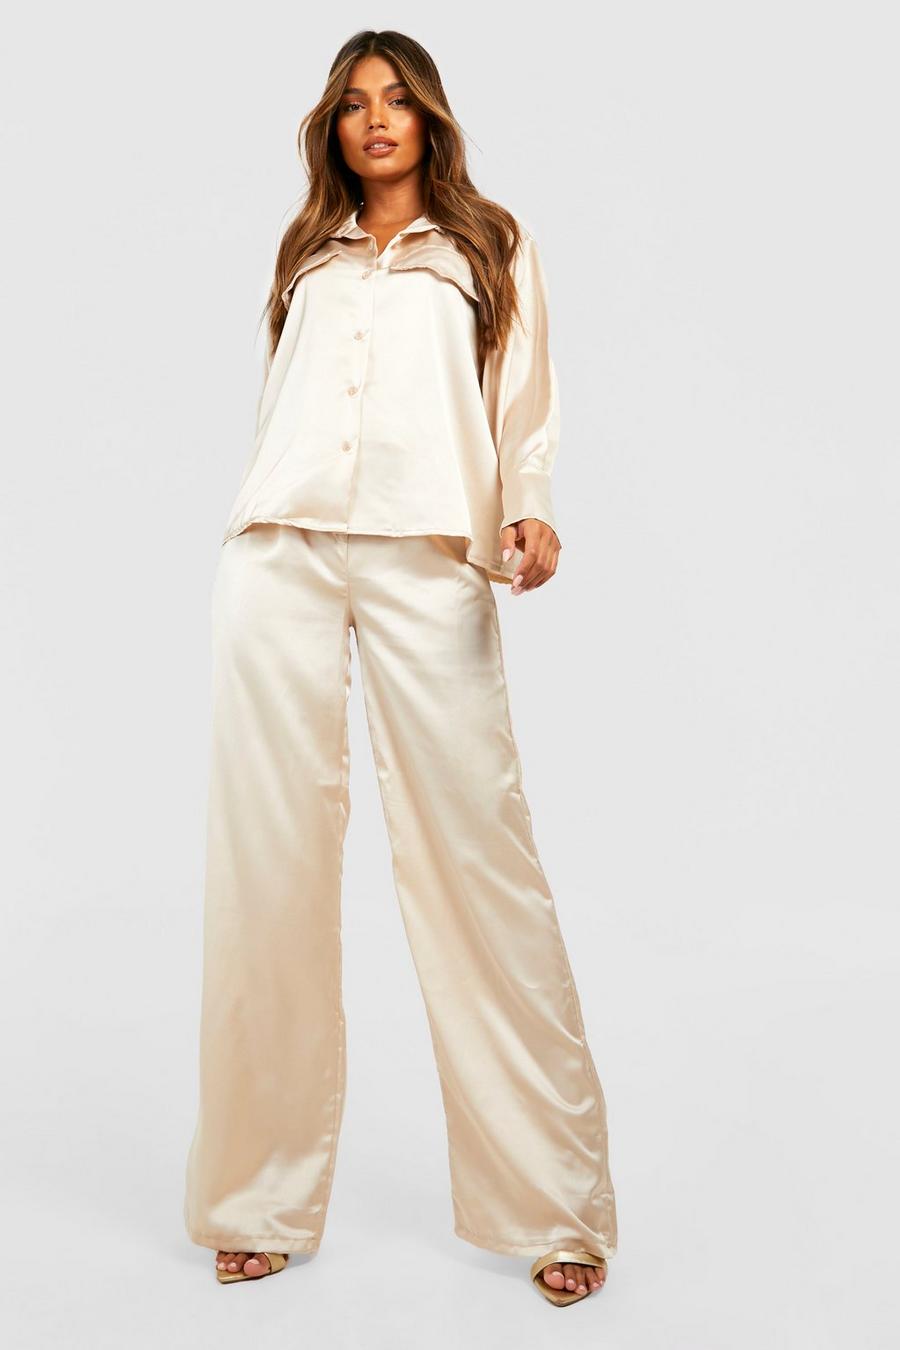 Champagne beige Satin Relaxed Fit Shirt & Wide Leg Pants image number 1